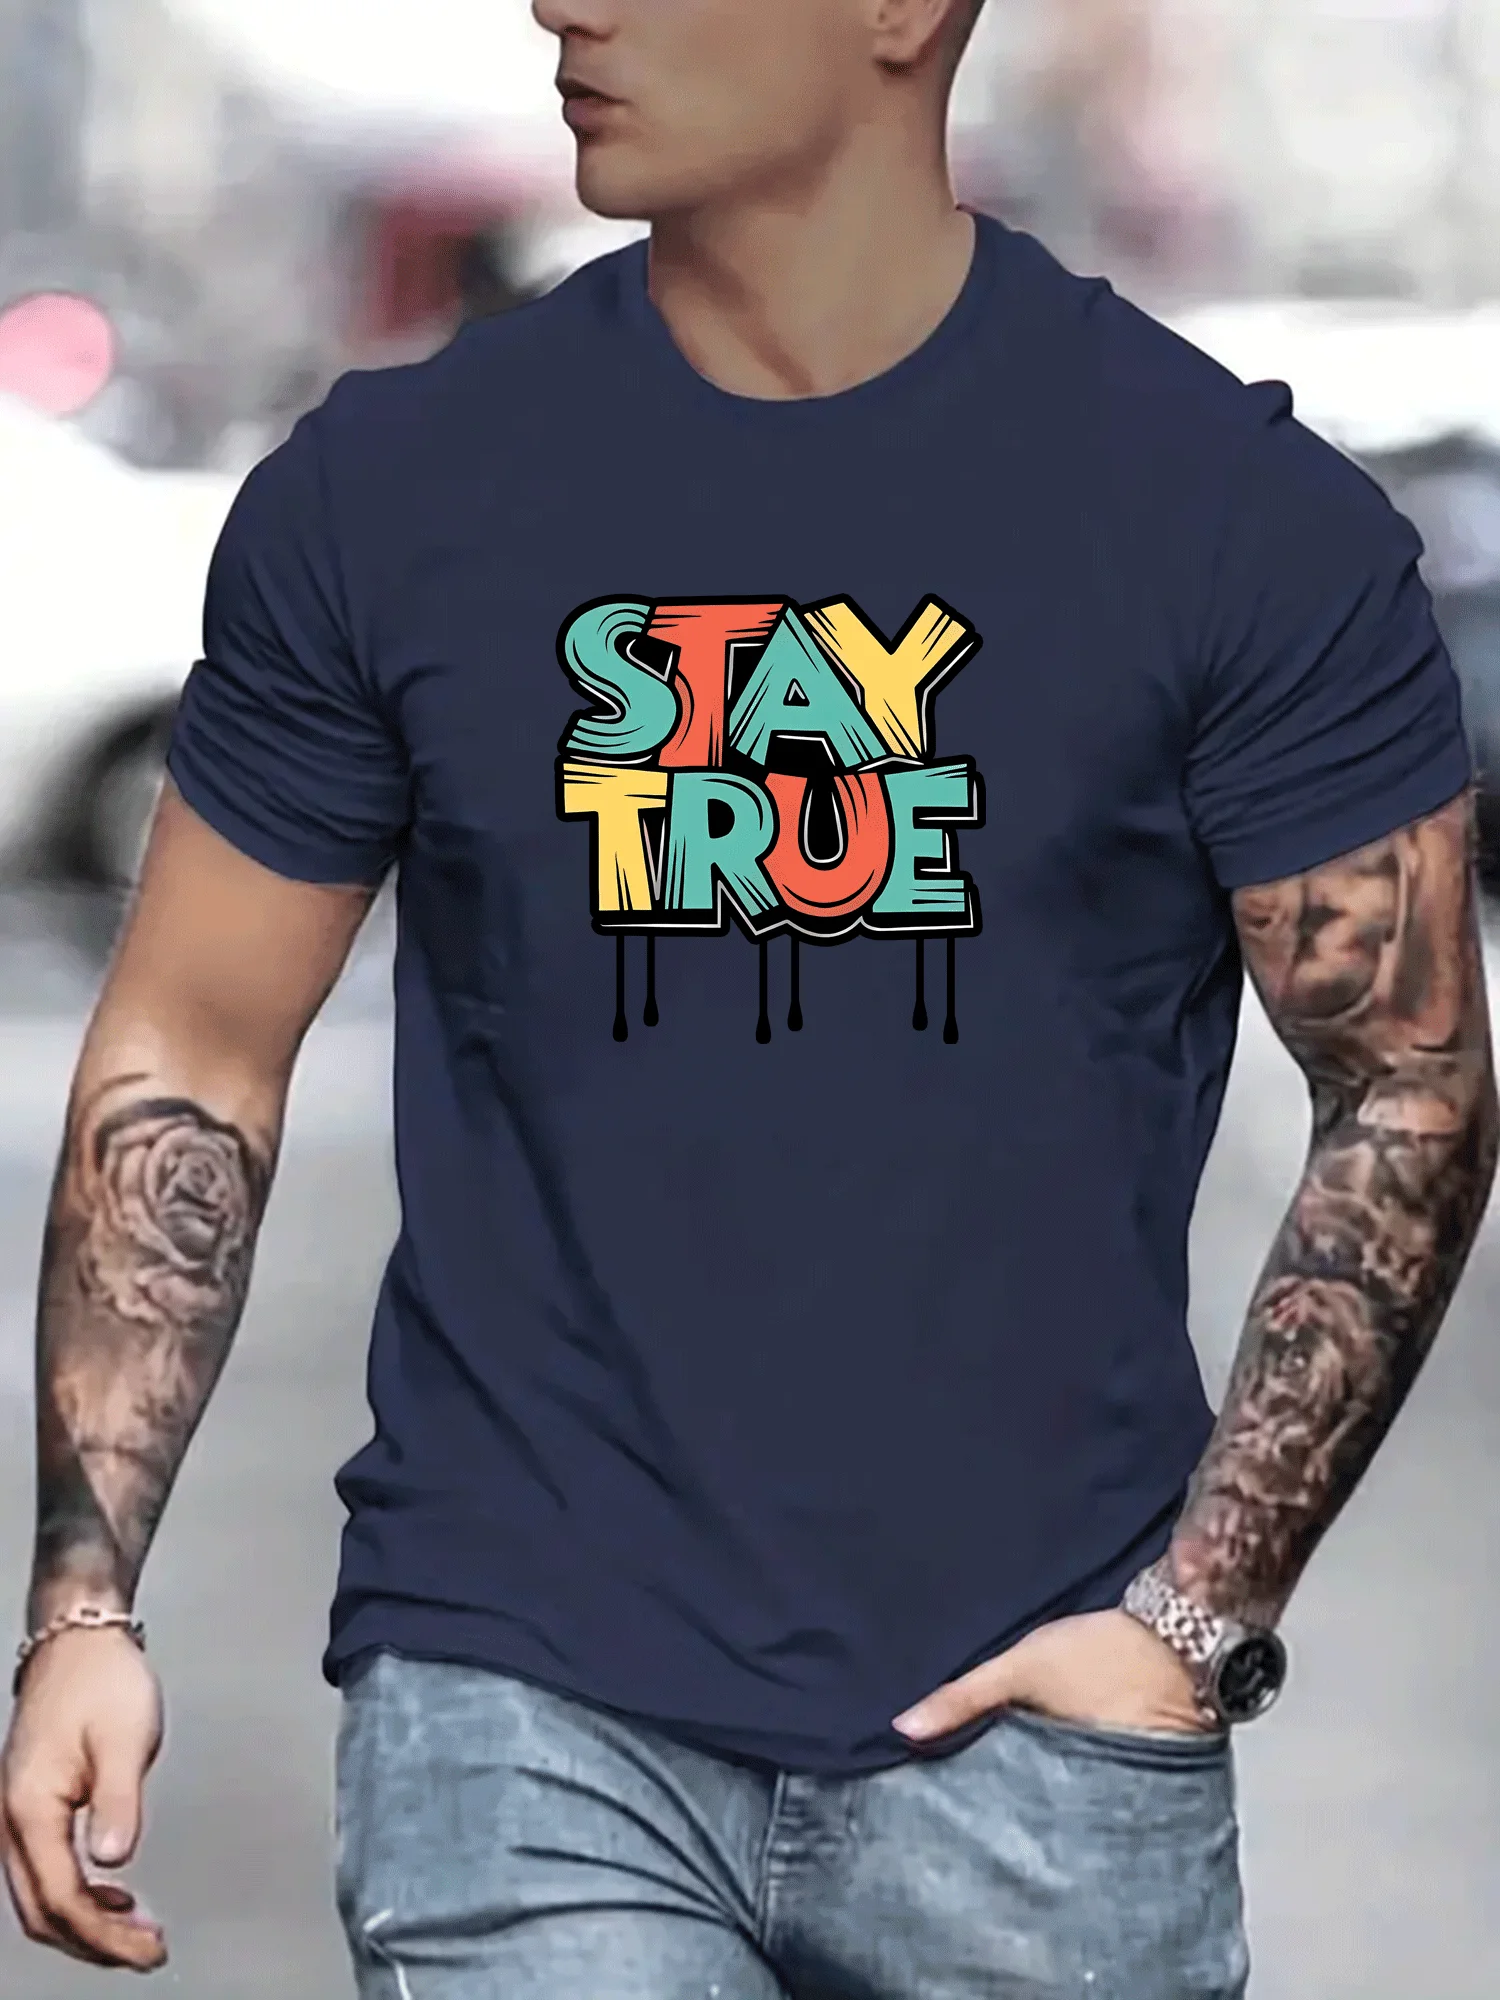 

Stay True T-Shirt - Men's summer casual stretch crew neck T-shirt, comfortable and breathable, street style must-have!